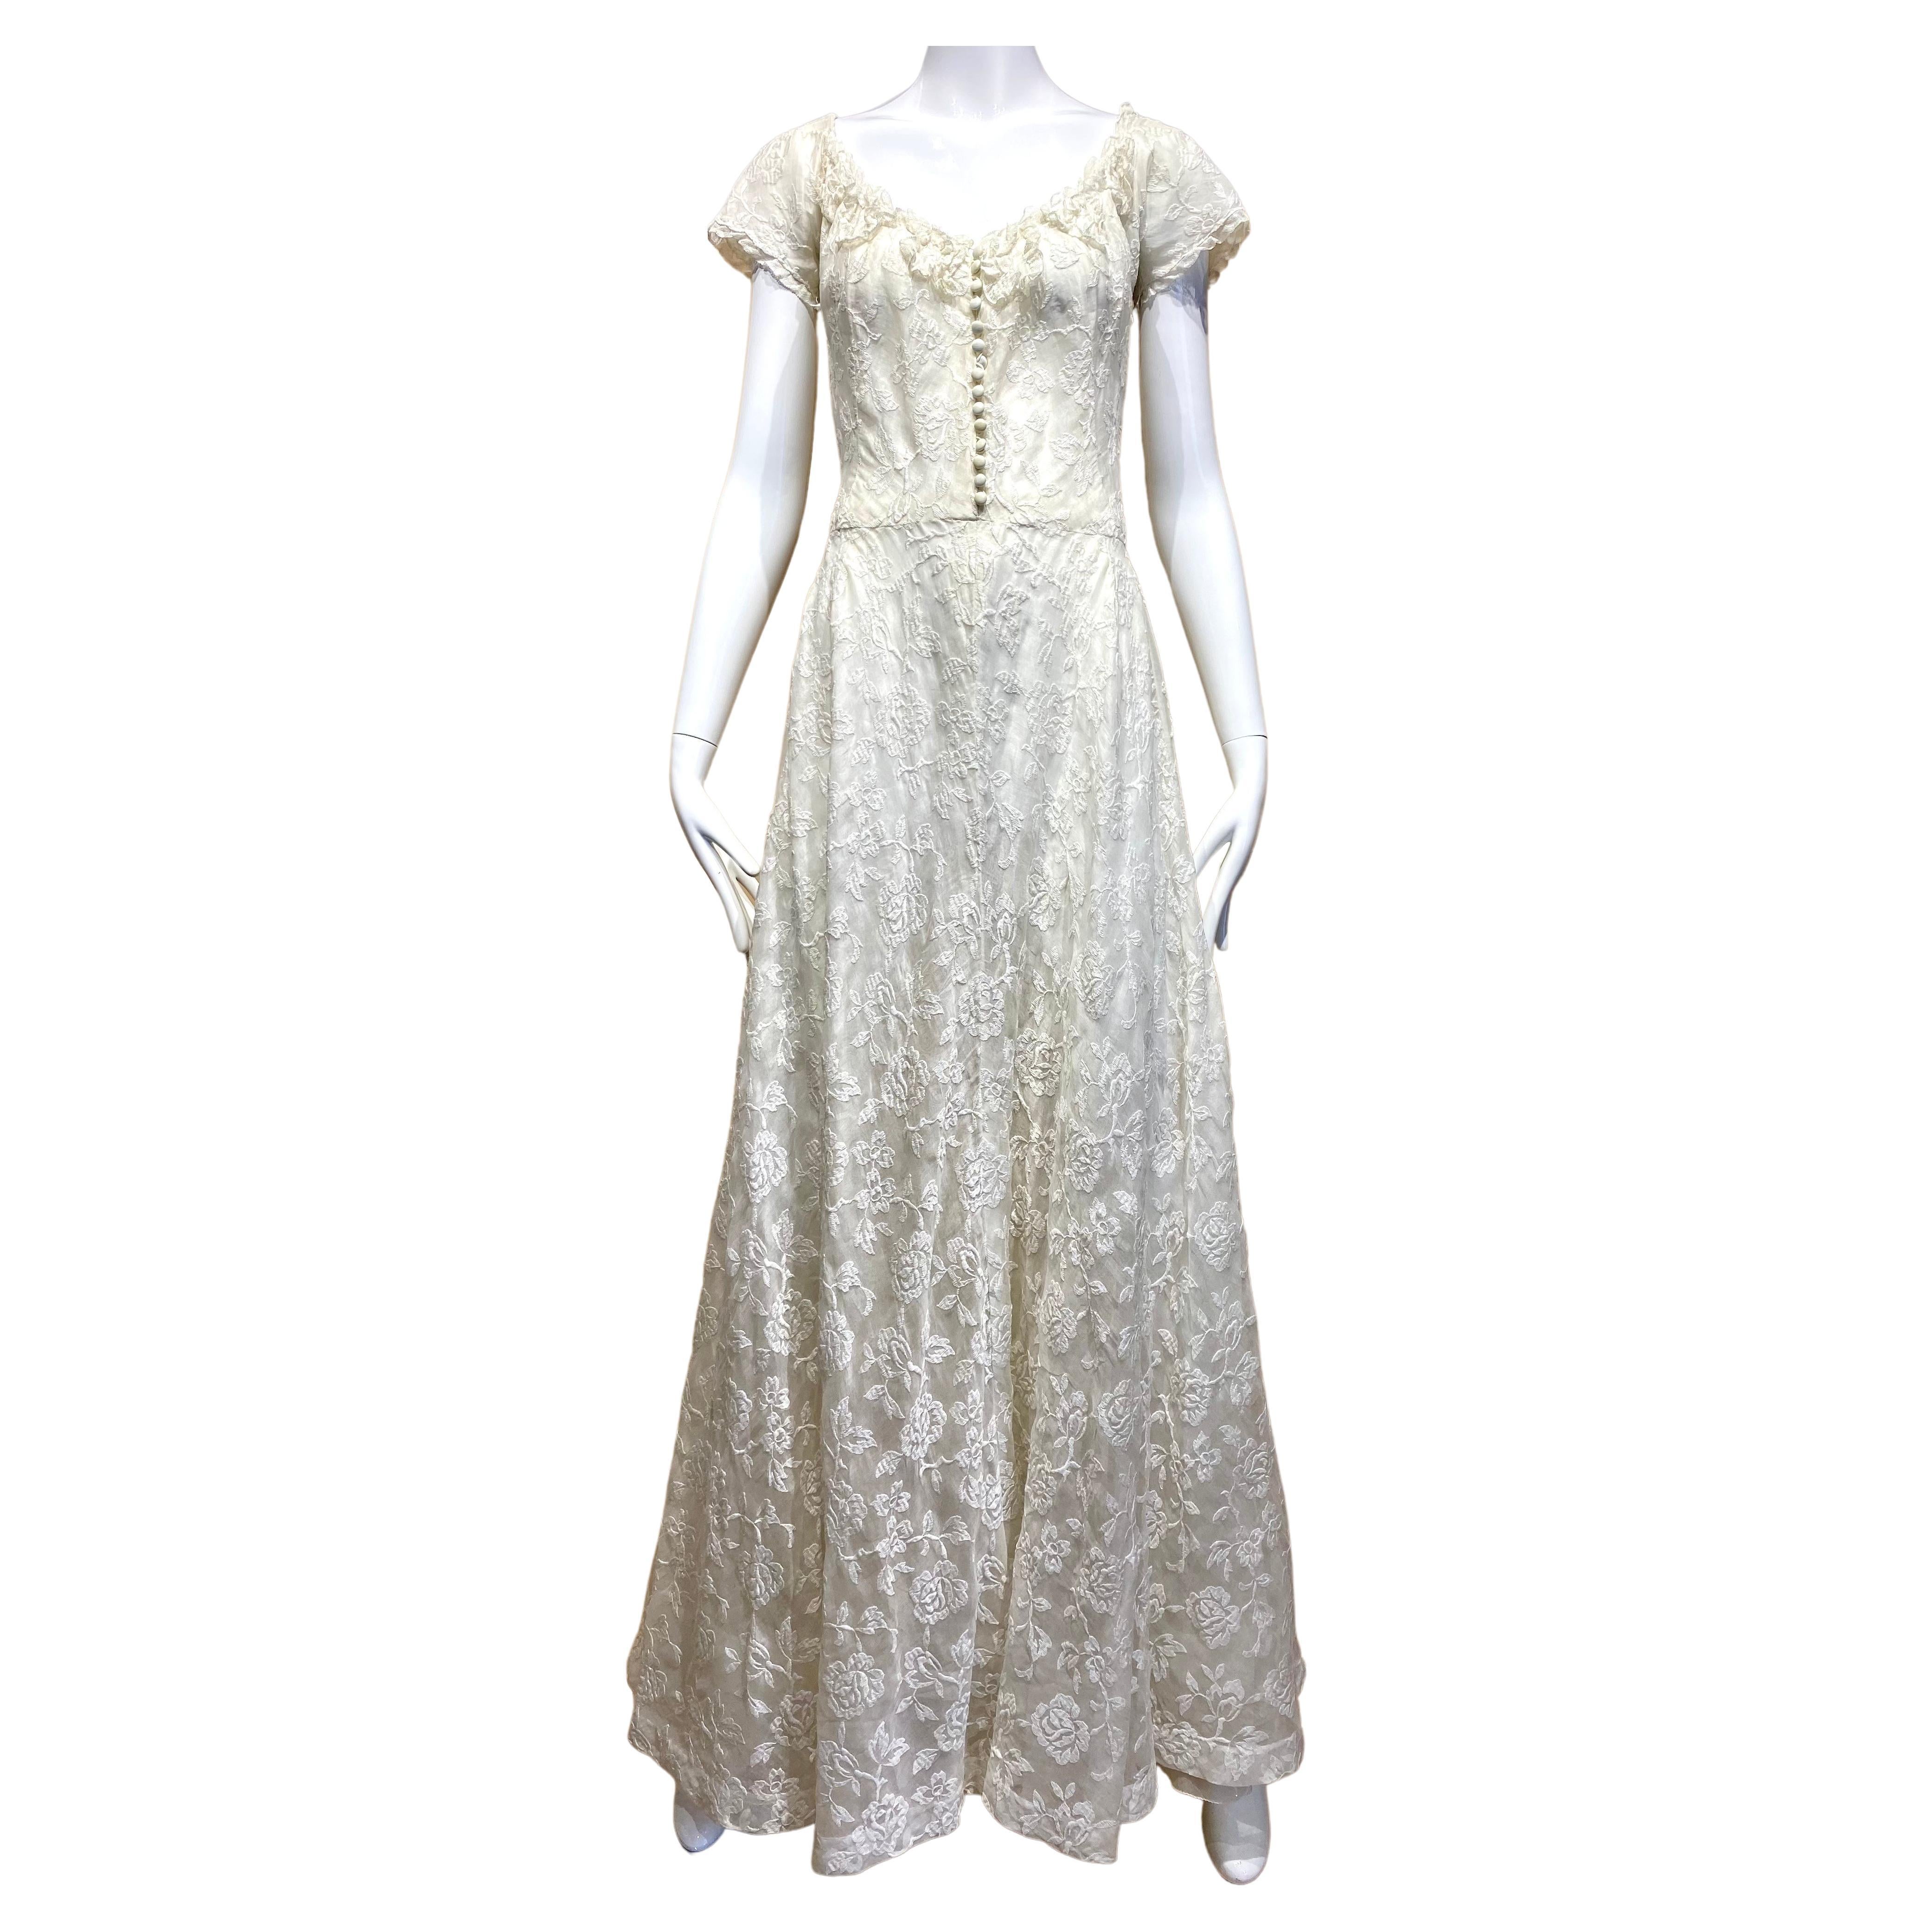 1930s White Cotton Embroidered Dress with Lace For Sale